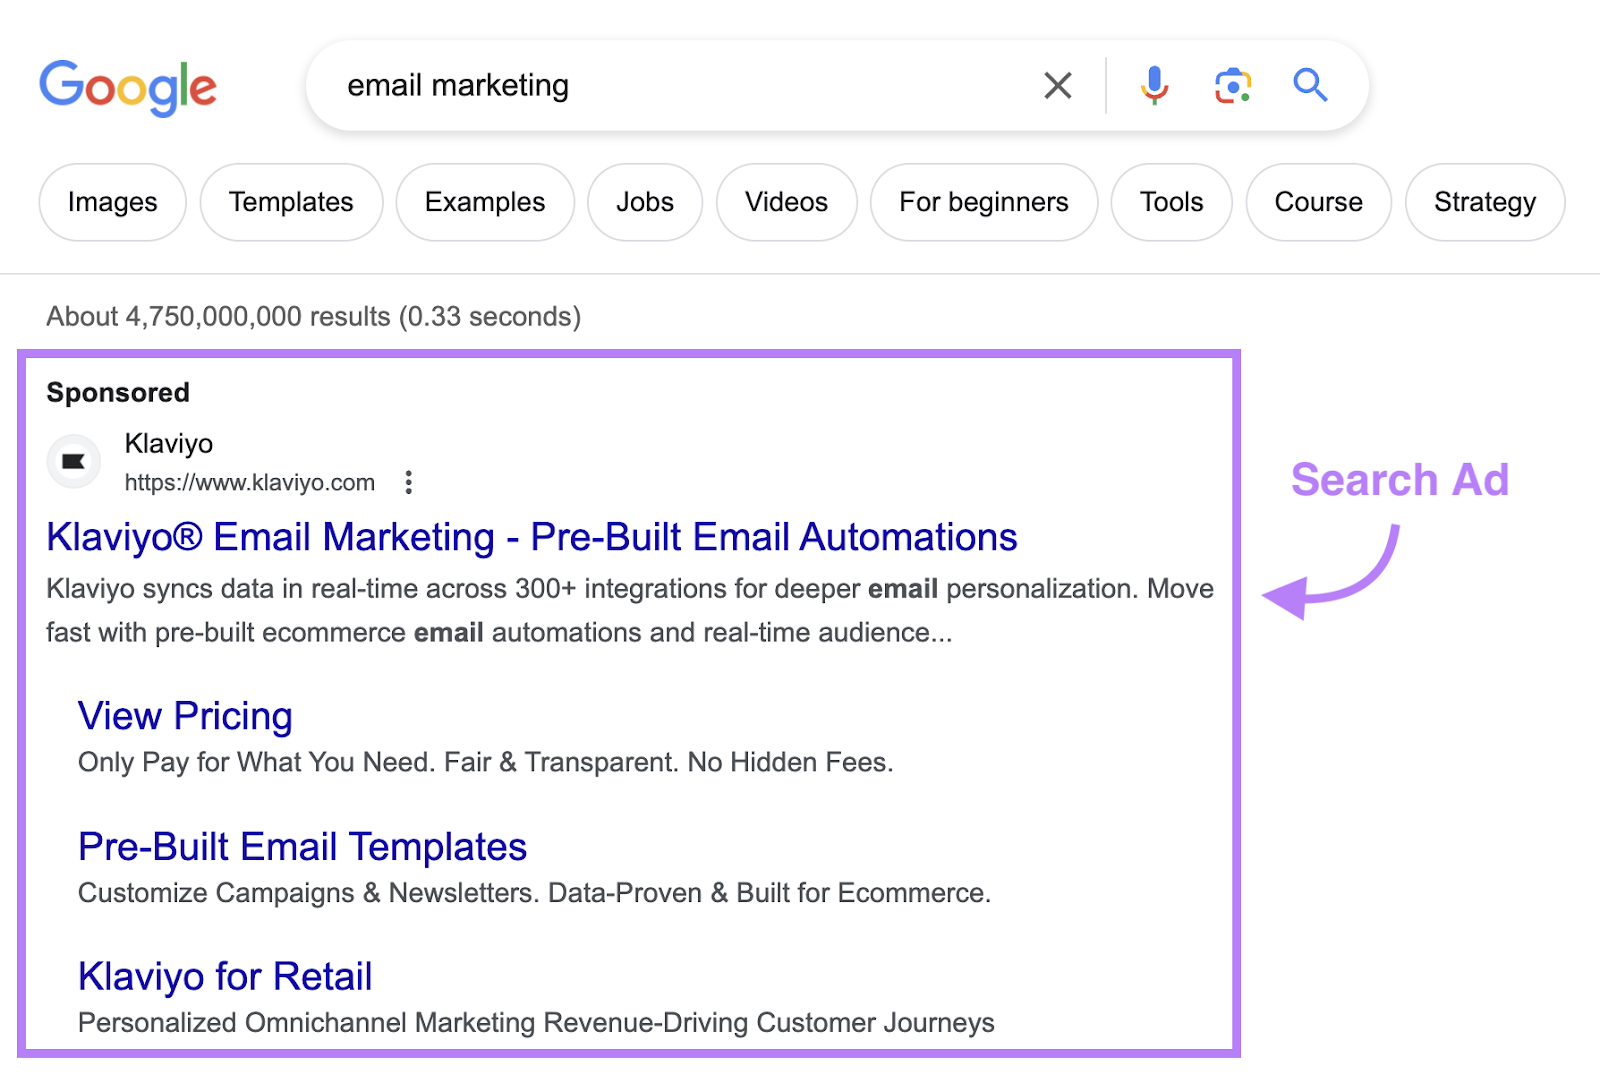 a PPC search ad from Klaviyo for email marketing search